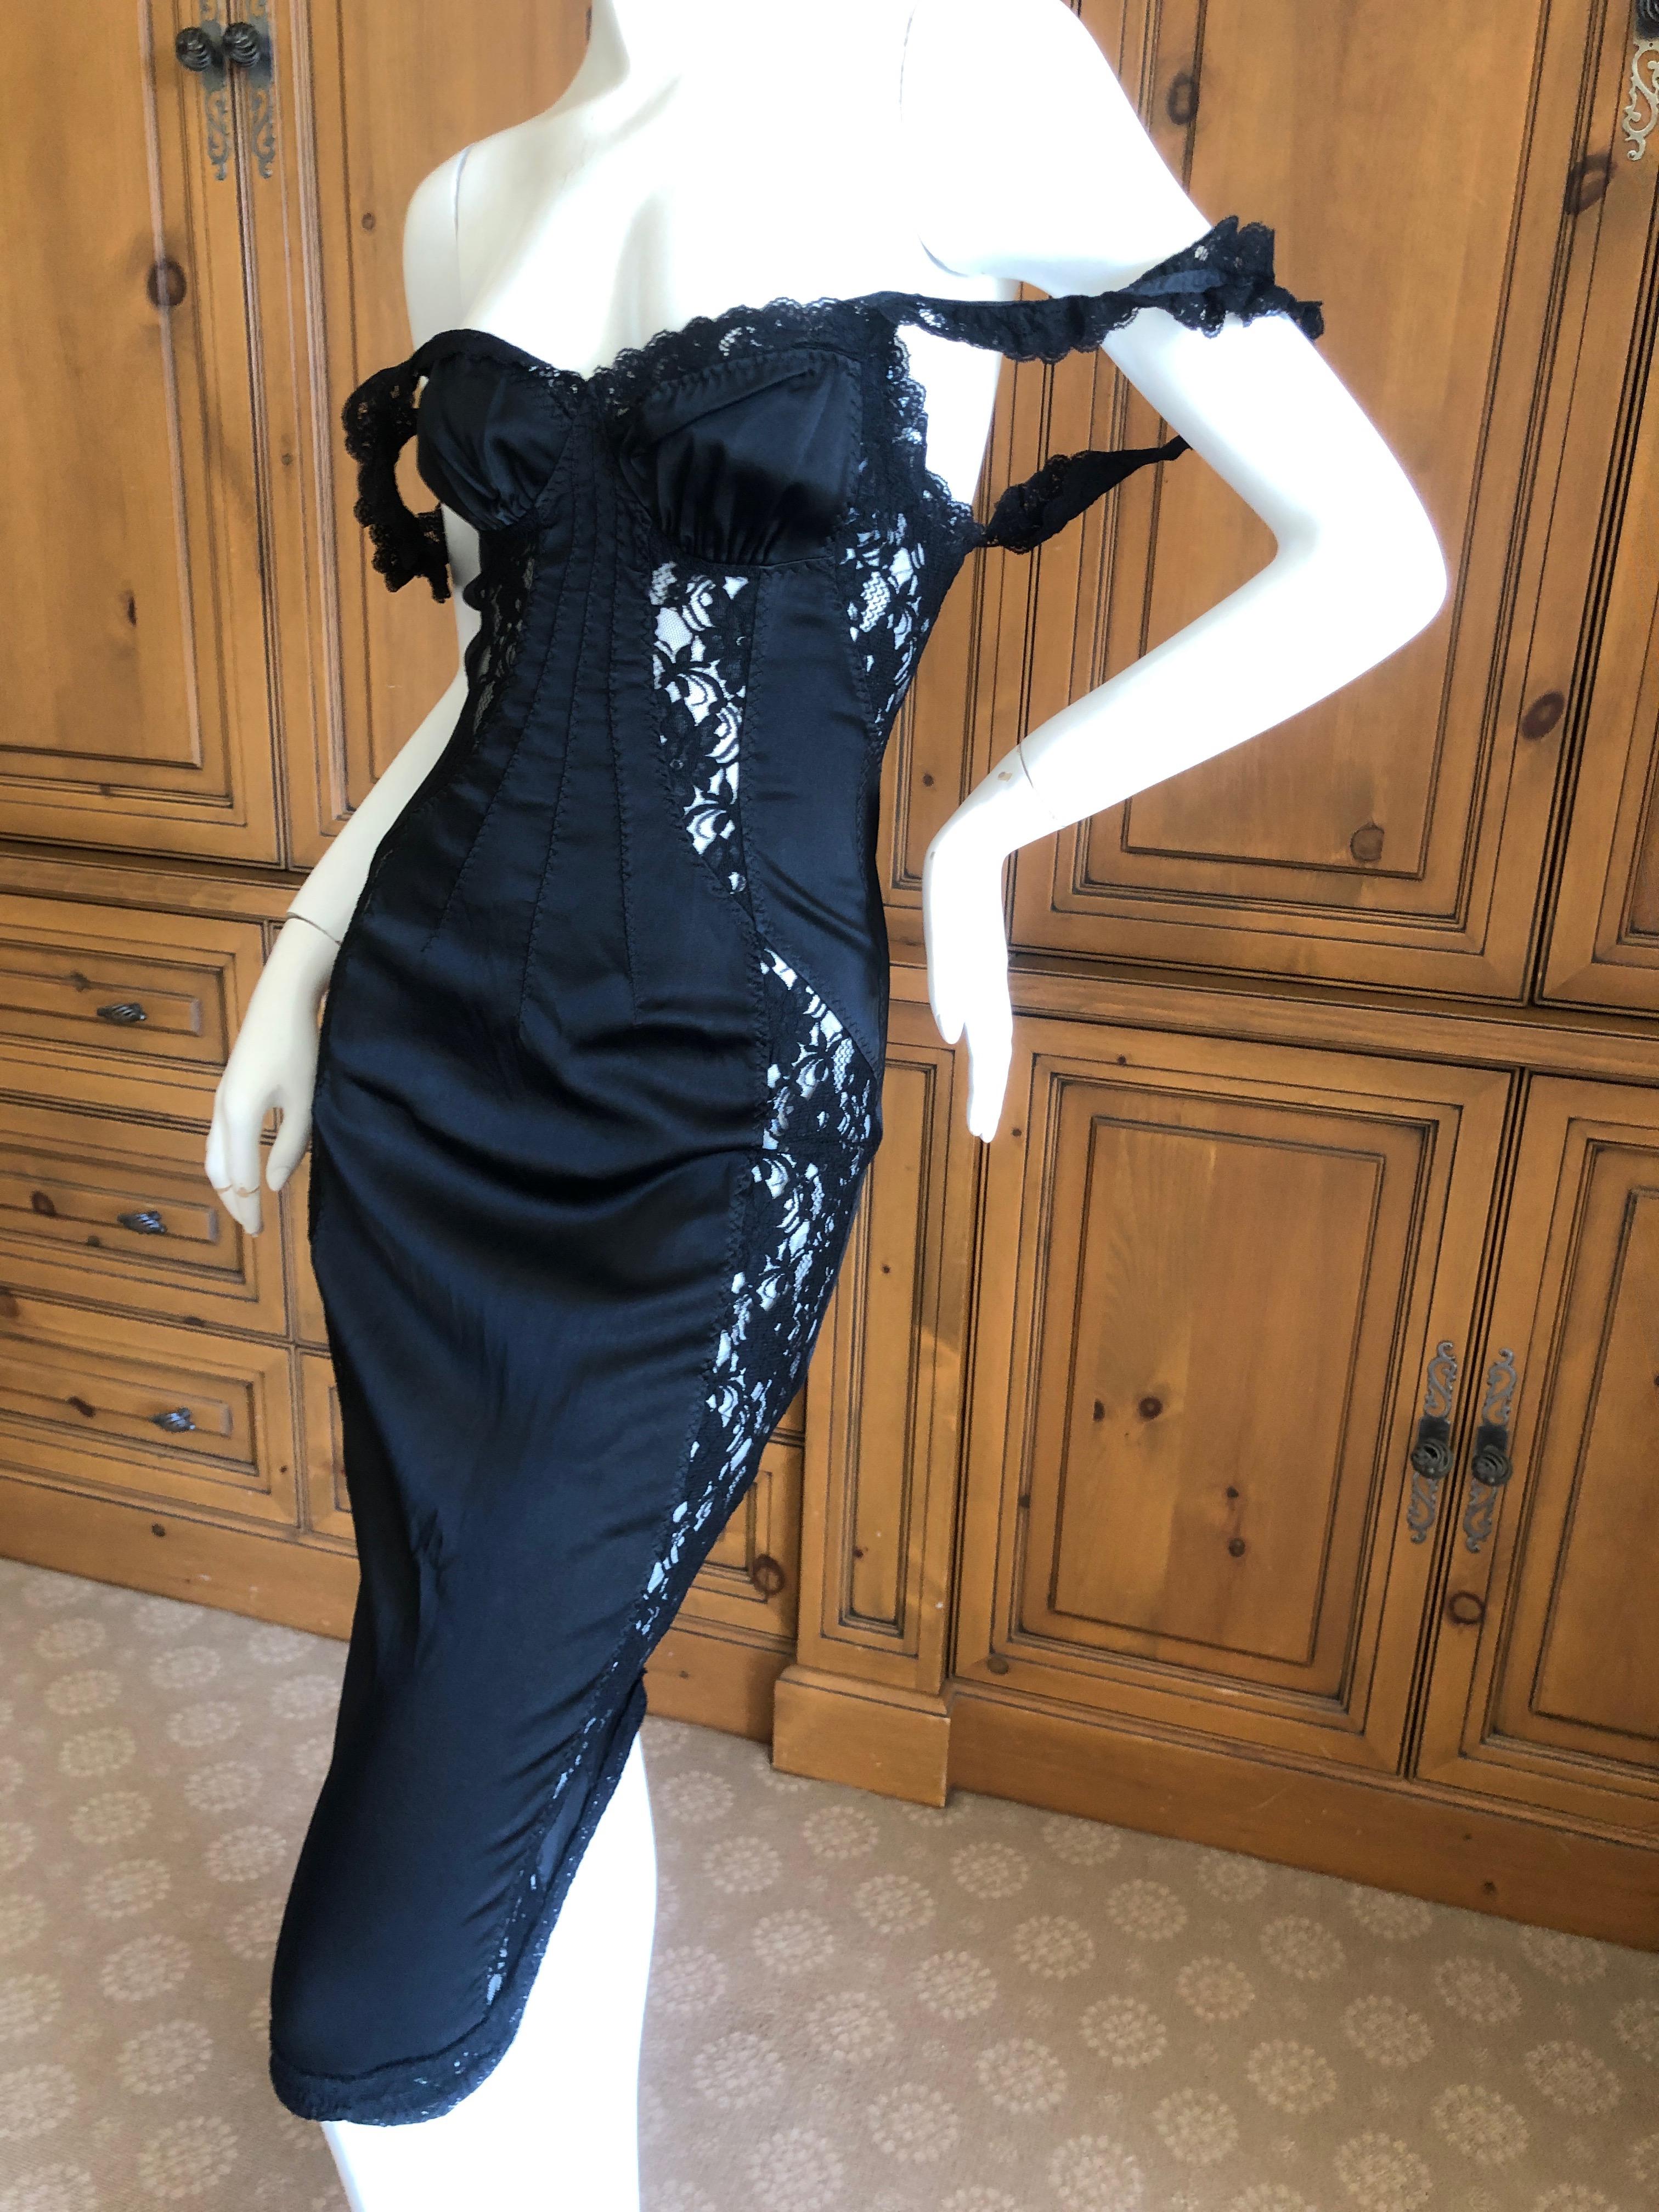 D&G Dolce & Gabbana Vintage Little Black Dress w Lace Inserts
Marked size 40 , this runs small
Bust 34'
Waist 22